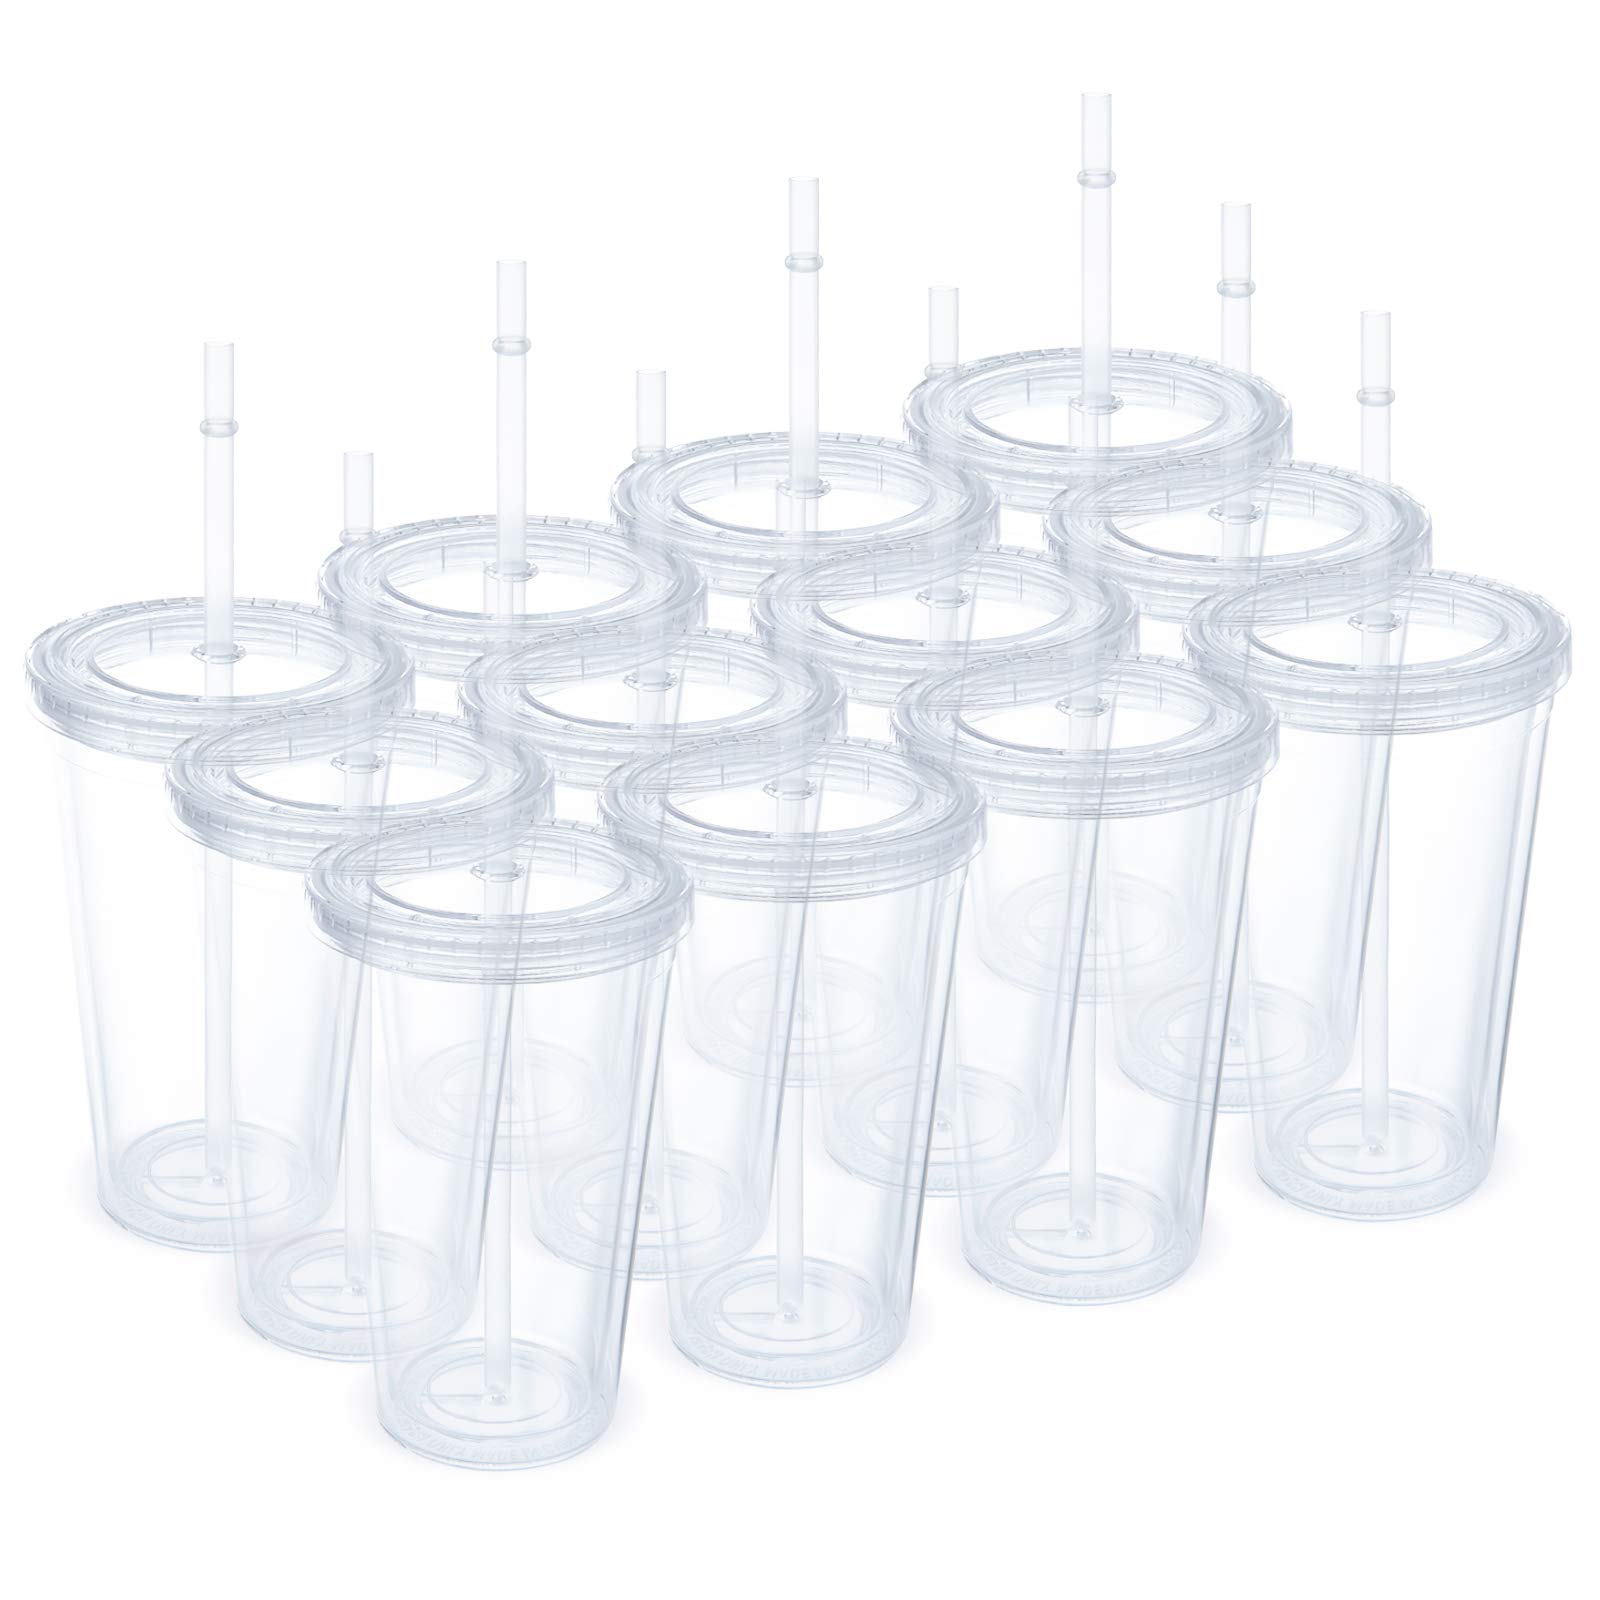 Gtmileo 12 Pack clear Insulated Tumblers, Plastic Tumbler cups, Double Wall Tumblers, 16Oz Acrylic Insulated Tumbler cups with Lid and R